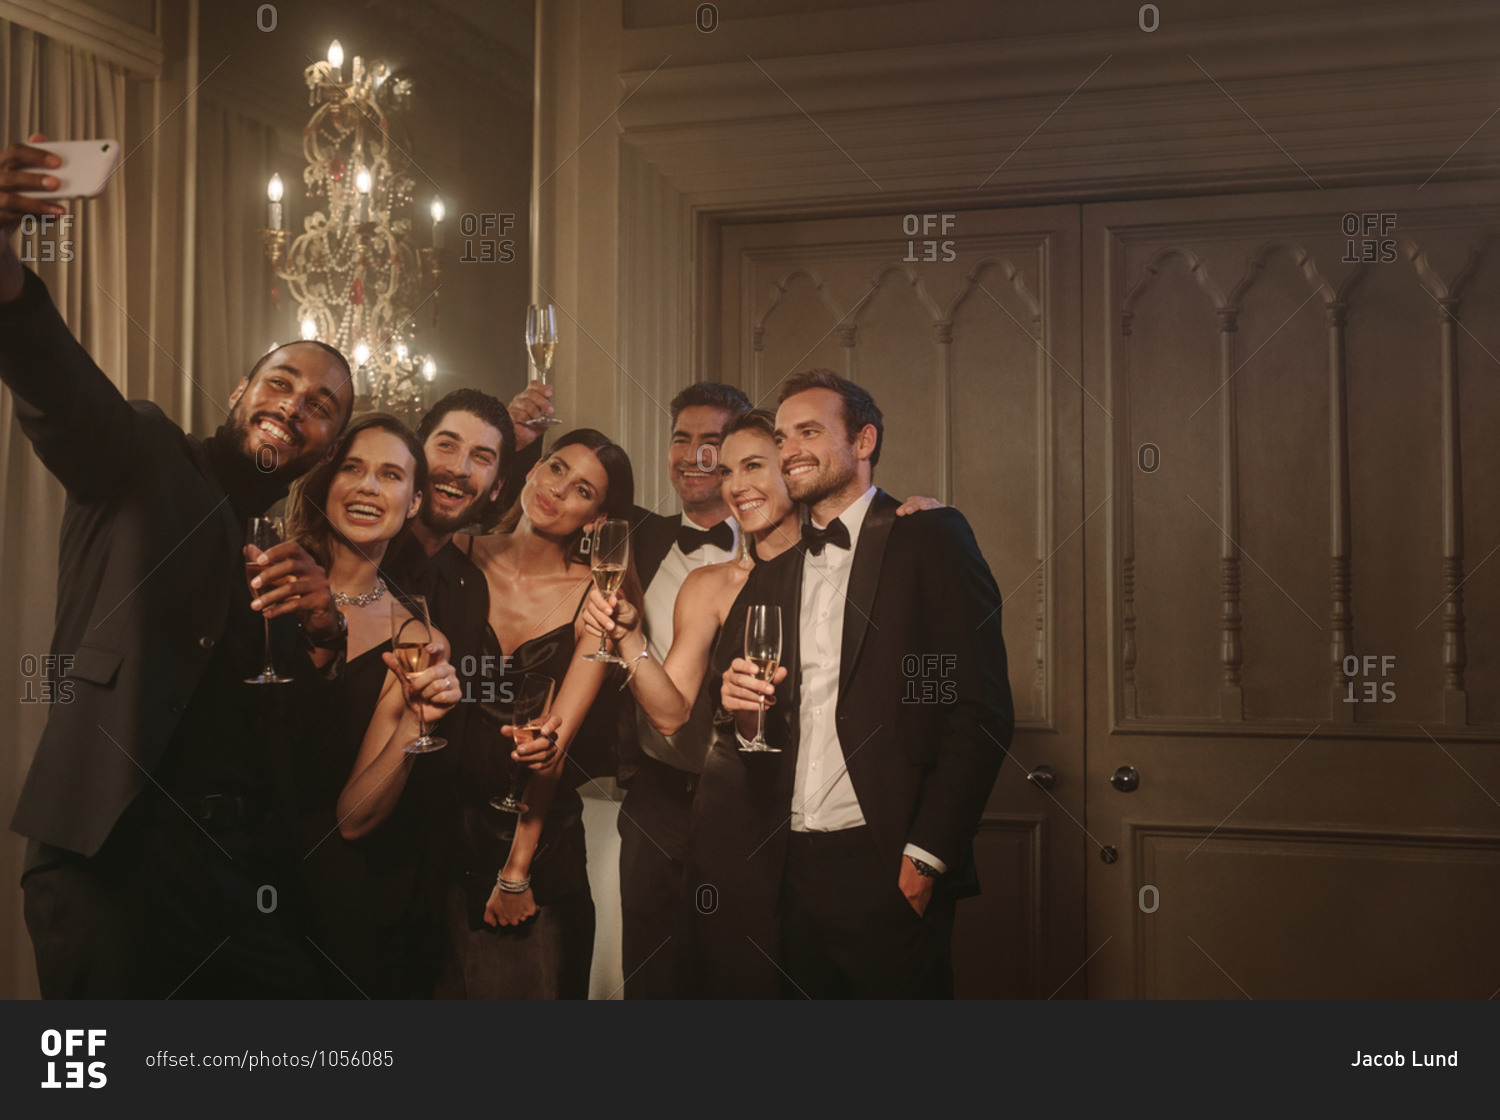 Man taking selfie with his friends at a celebrating event party. Group of multi-ethnic friends posing for a selfie together at gala night.